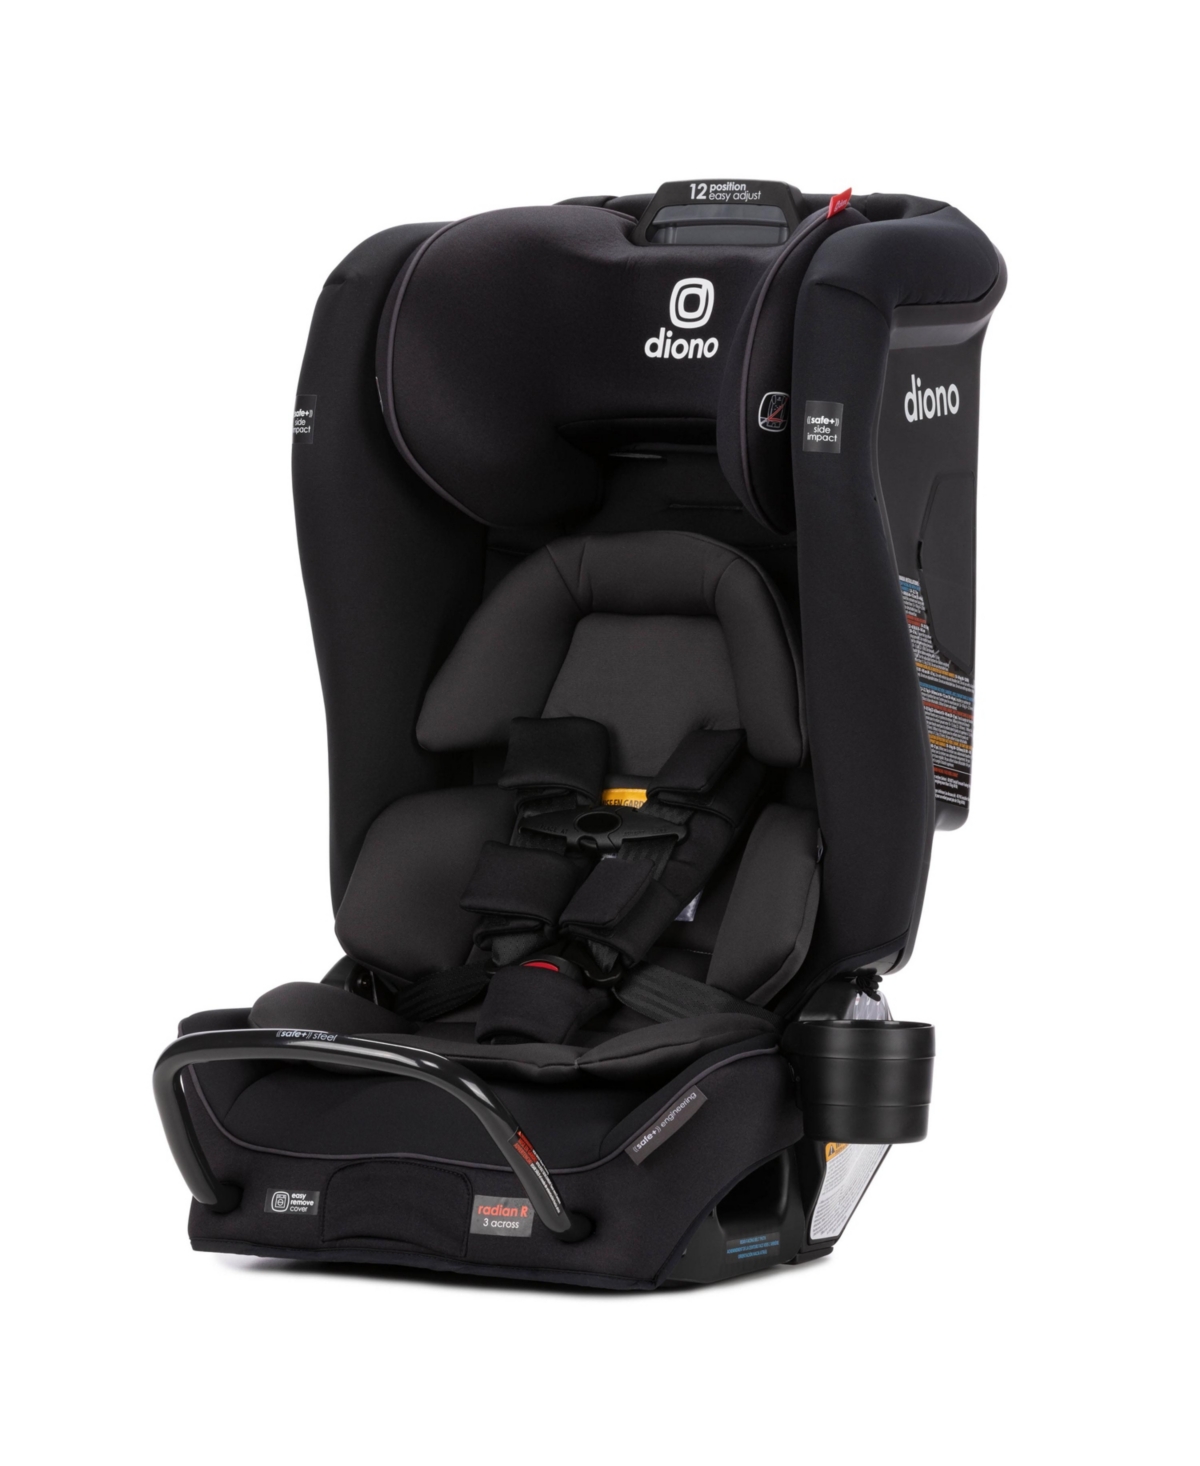 Diono Radian 3rxt Safe All-in-one Convertible Car Seat In Black